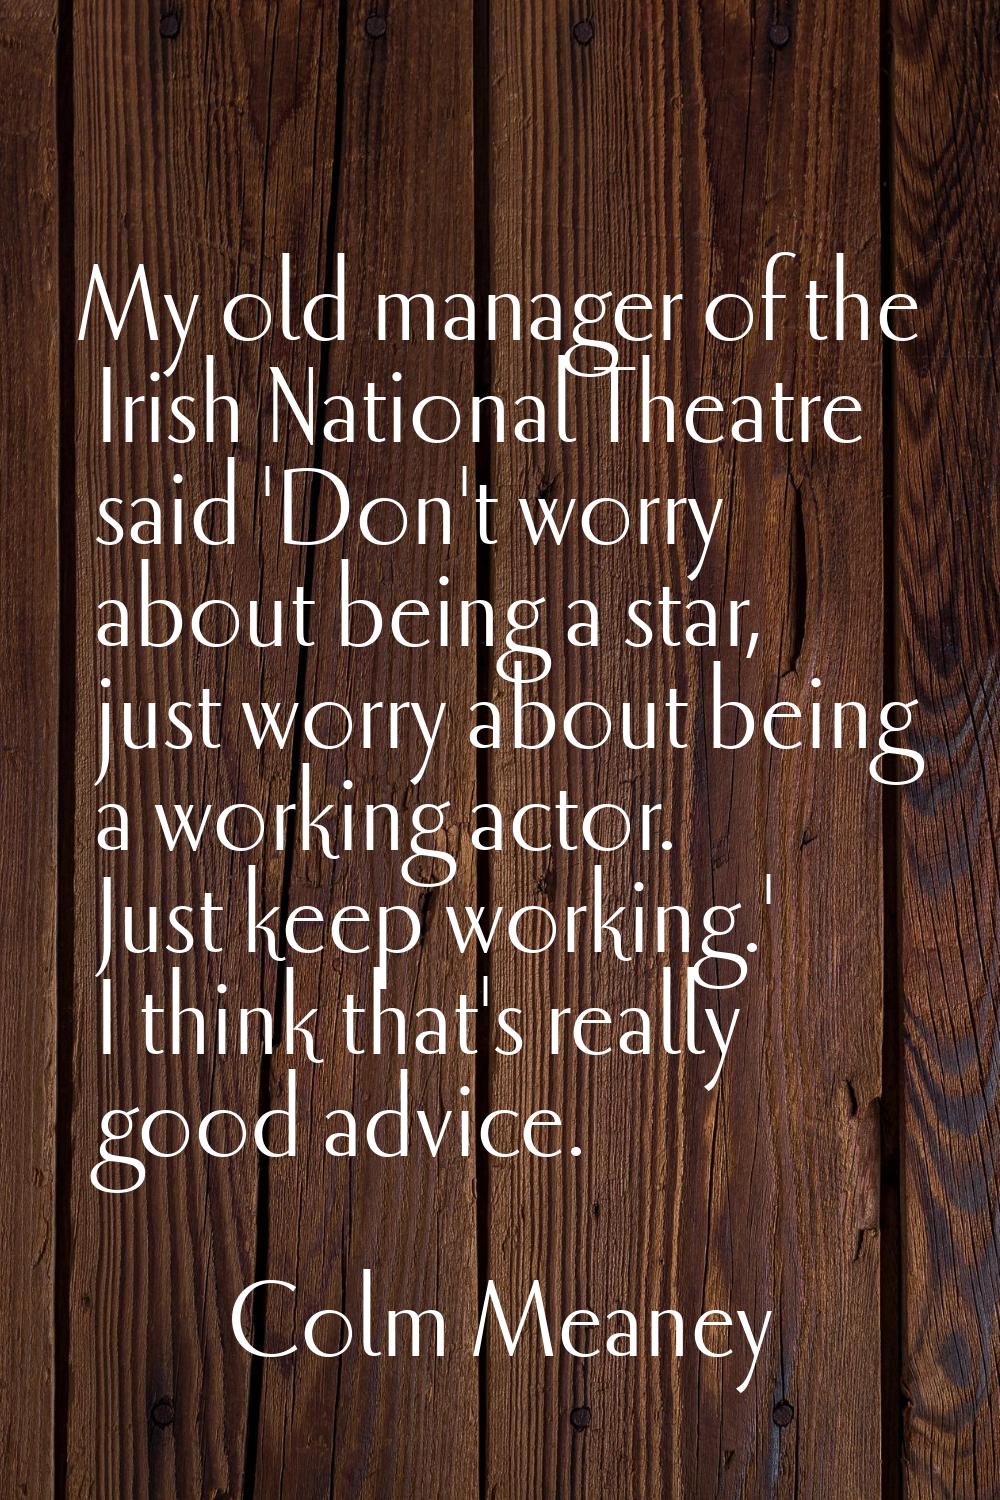 My old manager of the Irish National Theatre said 'Don't worry about being a star, just worry about